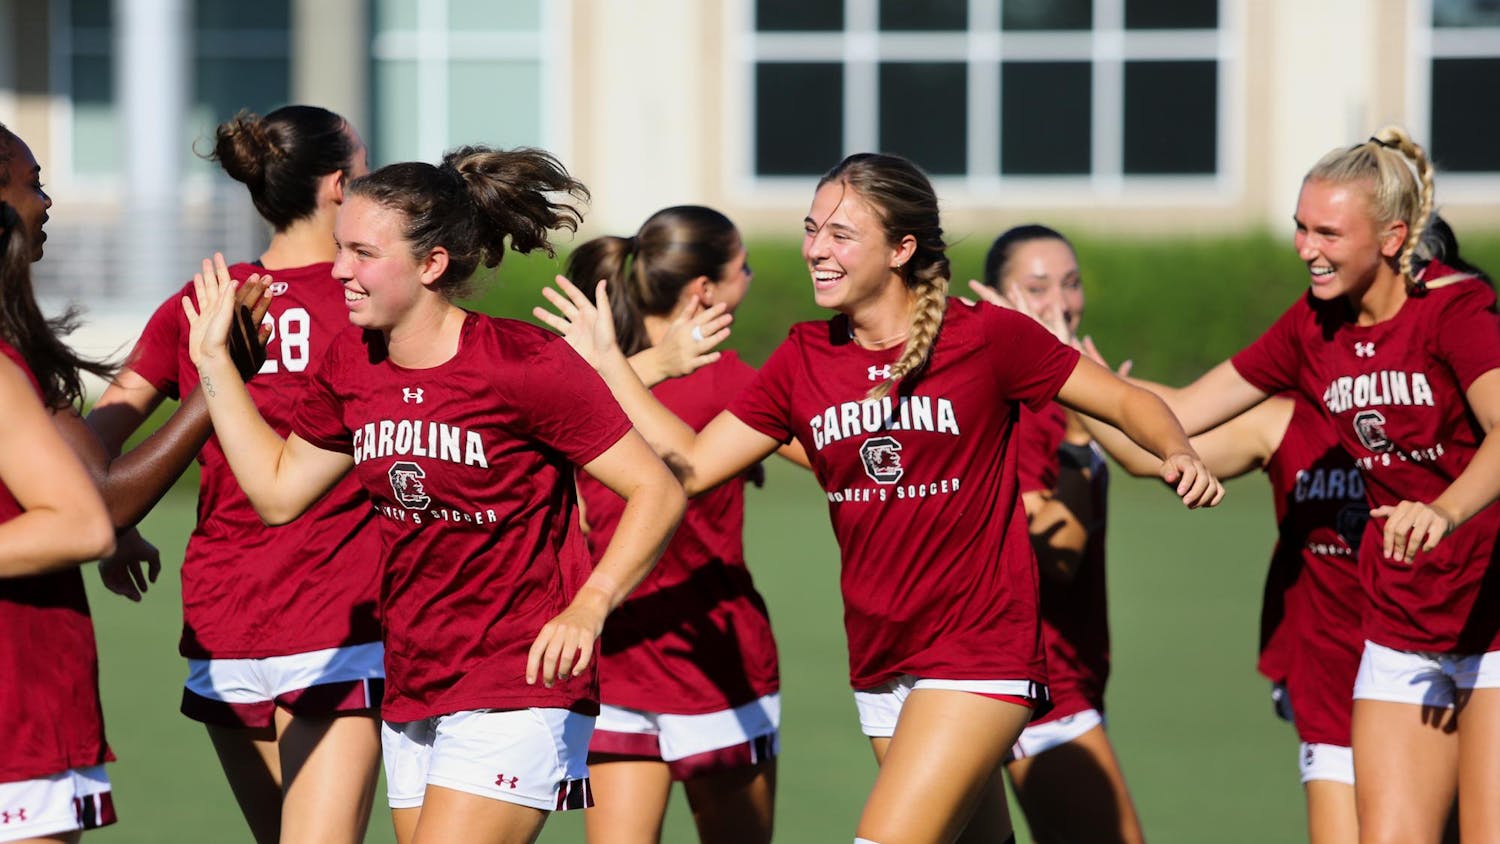 Senior midfielder Brianna Behm (left), freshman defender Amanda Patrick (middle) and freshman defender Sophie Johnson (right) high-five other members of the Gamecock women's soccer team prior to their game on Sept. 3, 2023. The team is ranked No. 16 in the country and will host the first round of the NCAA tournament on Nov. 10, 2023.